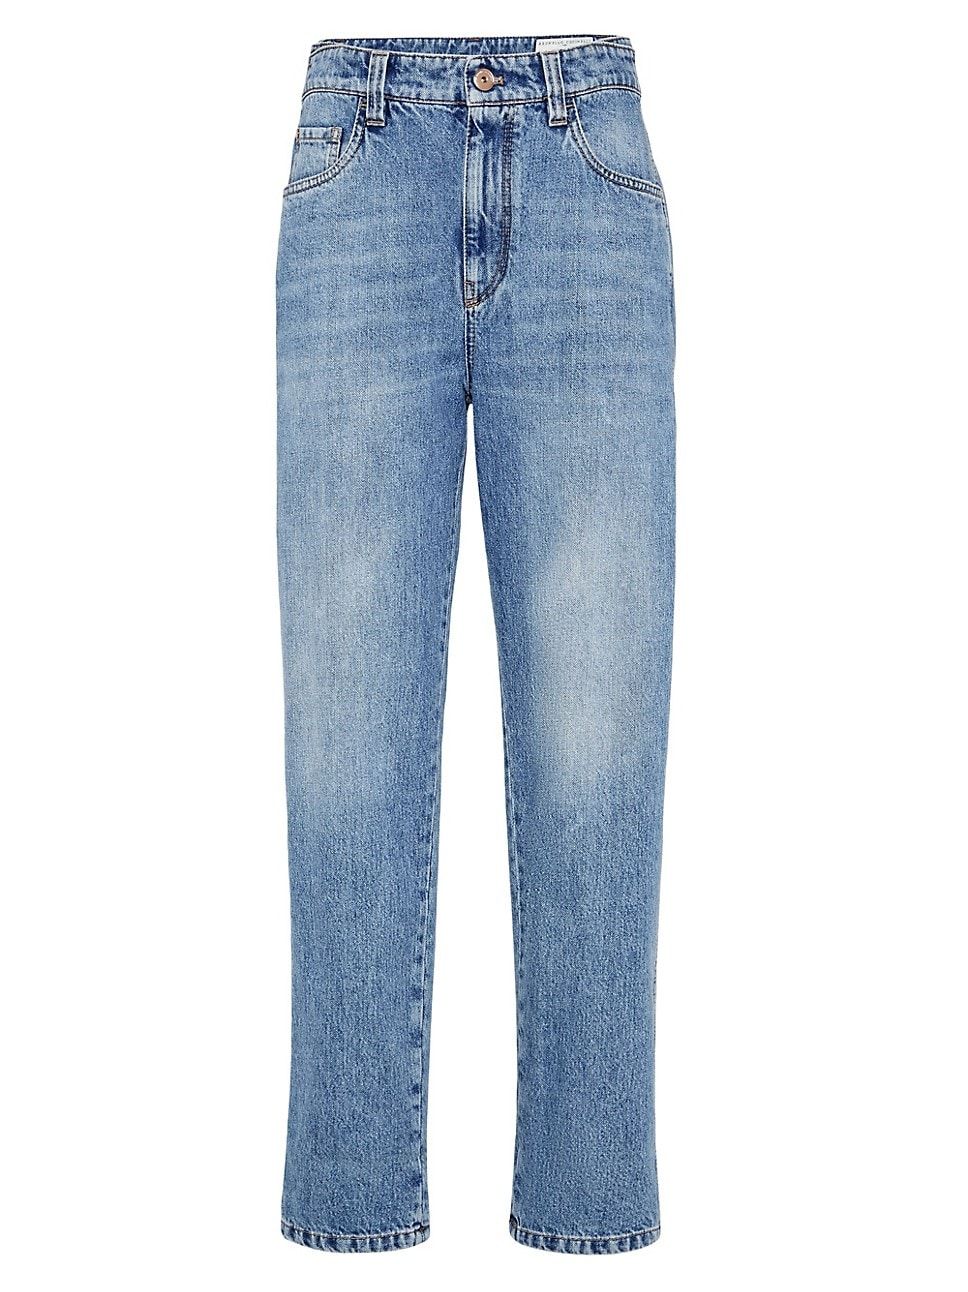 Authentic Denim Skater Trousers With Precious Patch | Saks Fifth Avenue